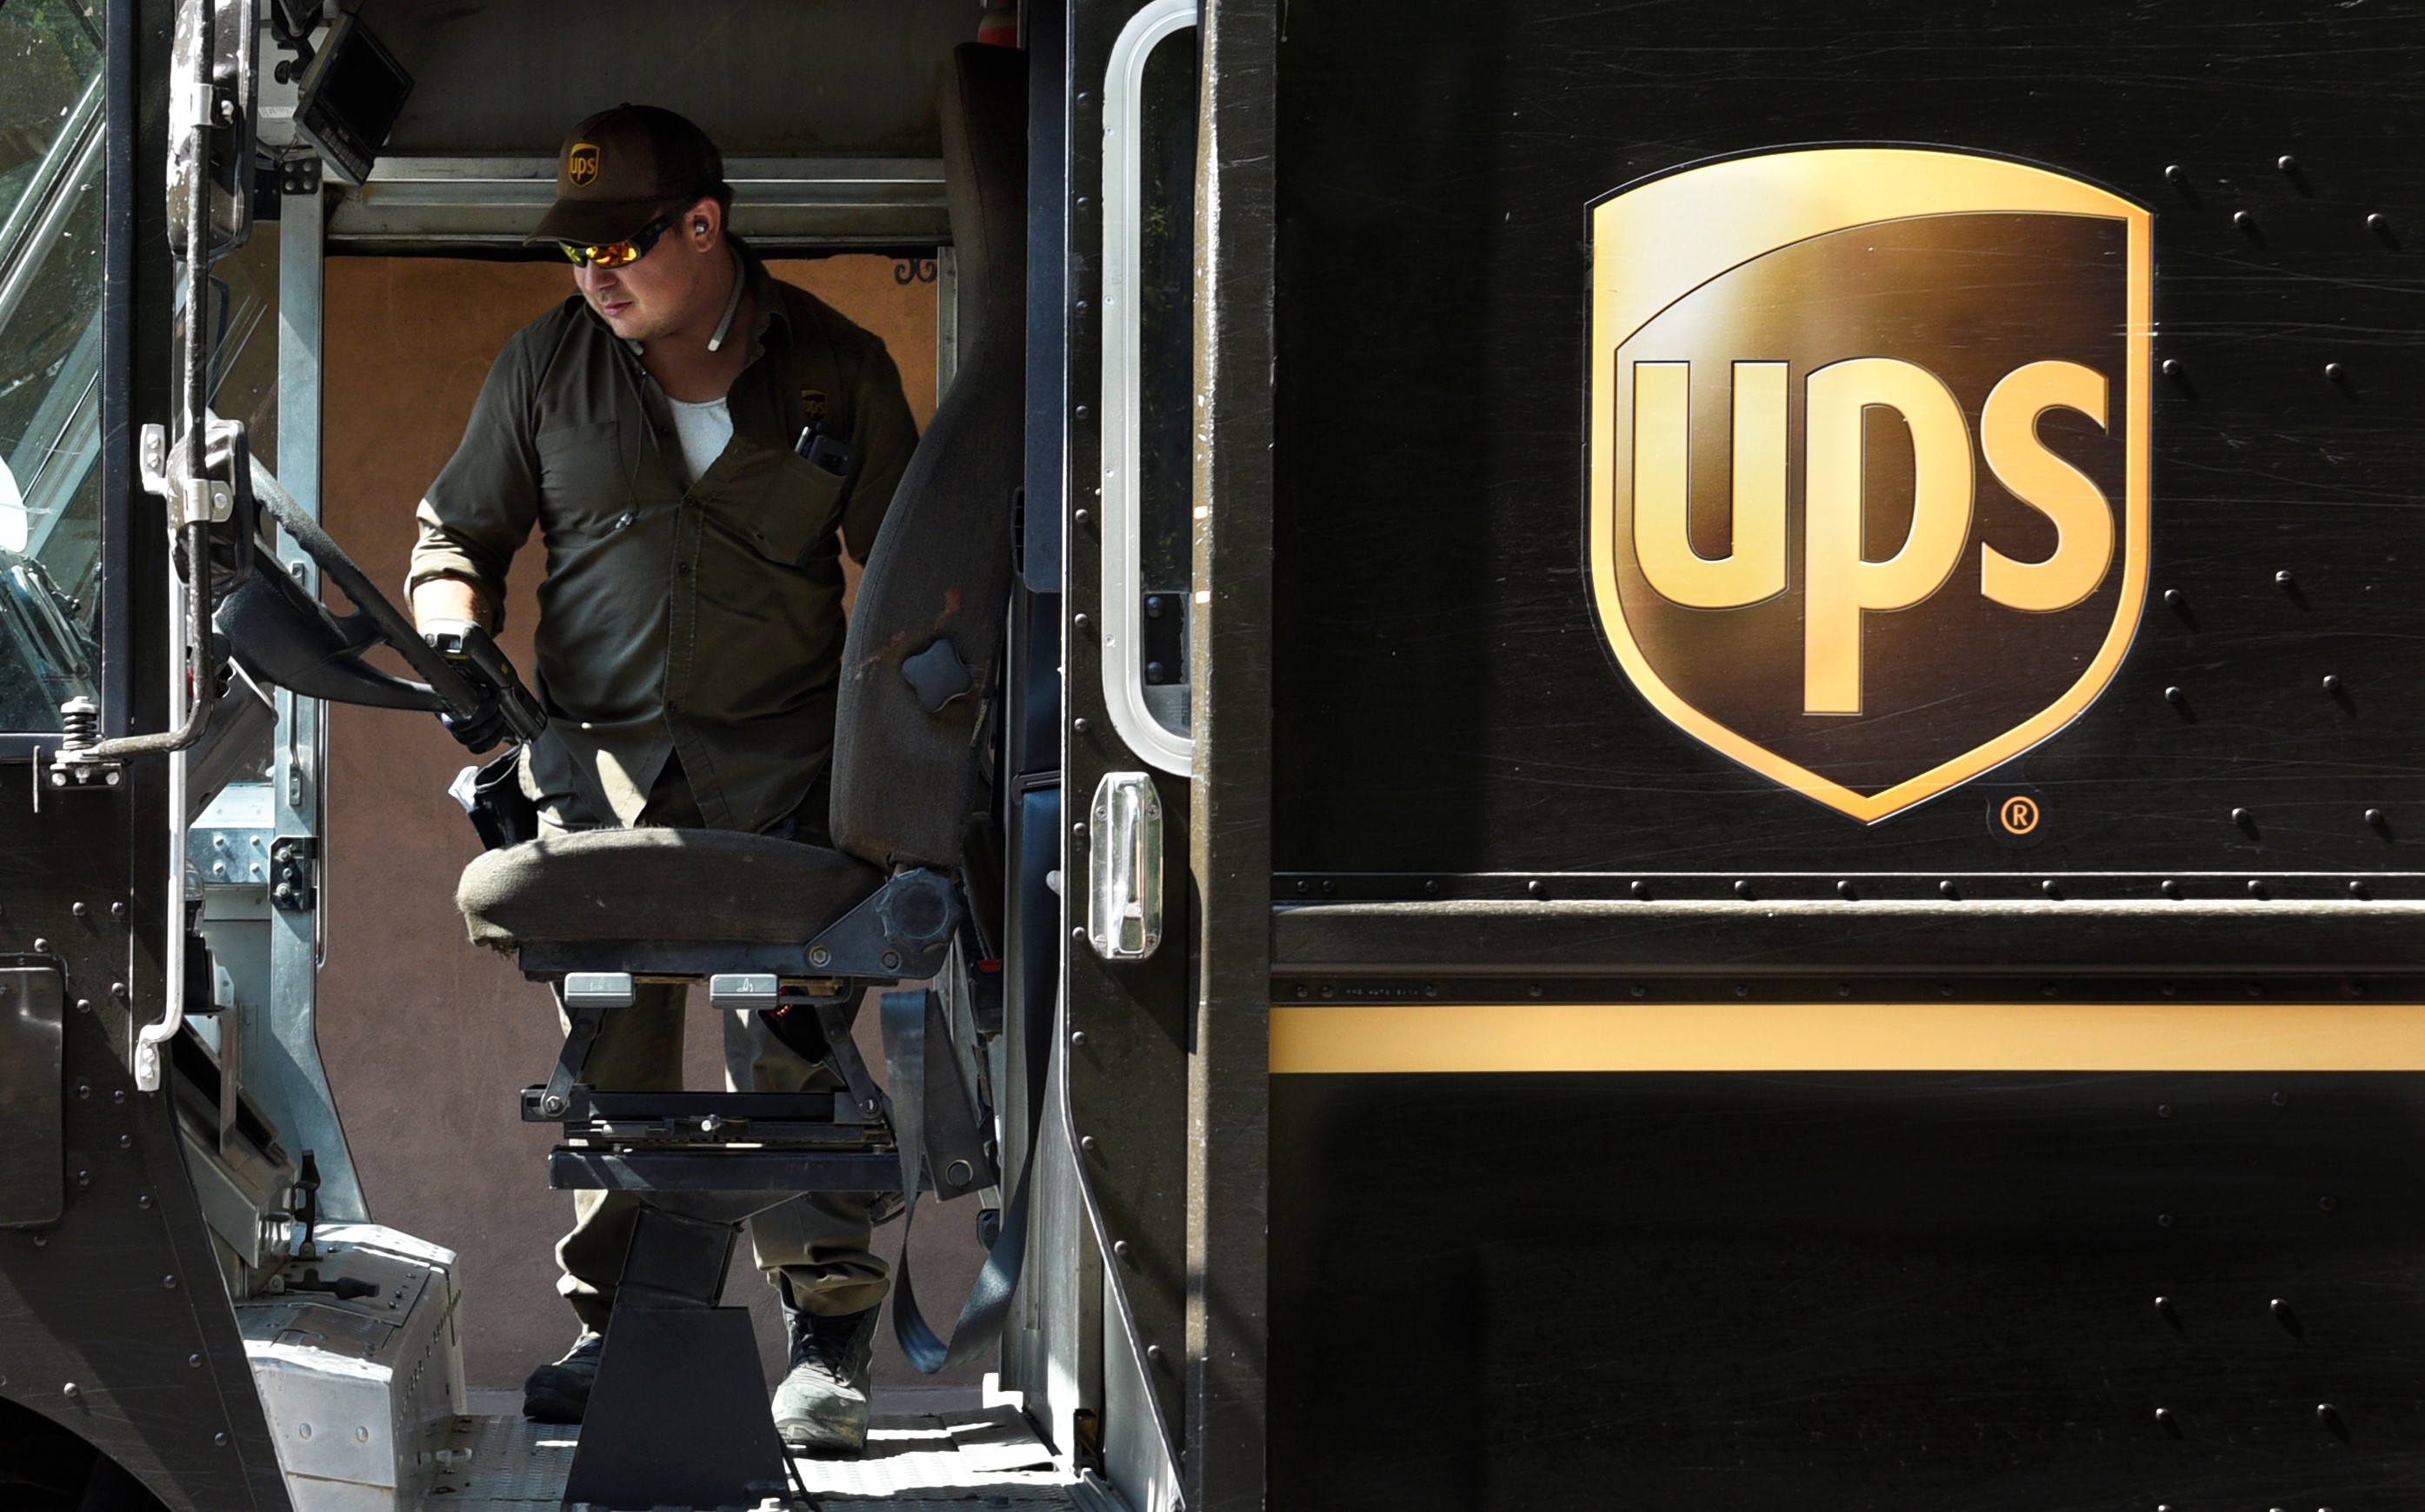 UPS Addresses Concerns Over Worker Collapsing in Arizona Heat 'He Is Fine'